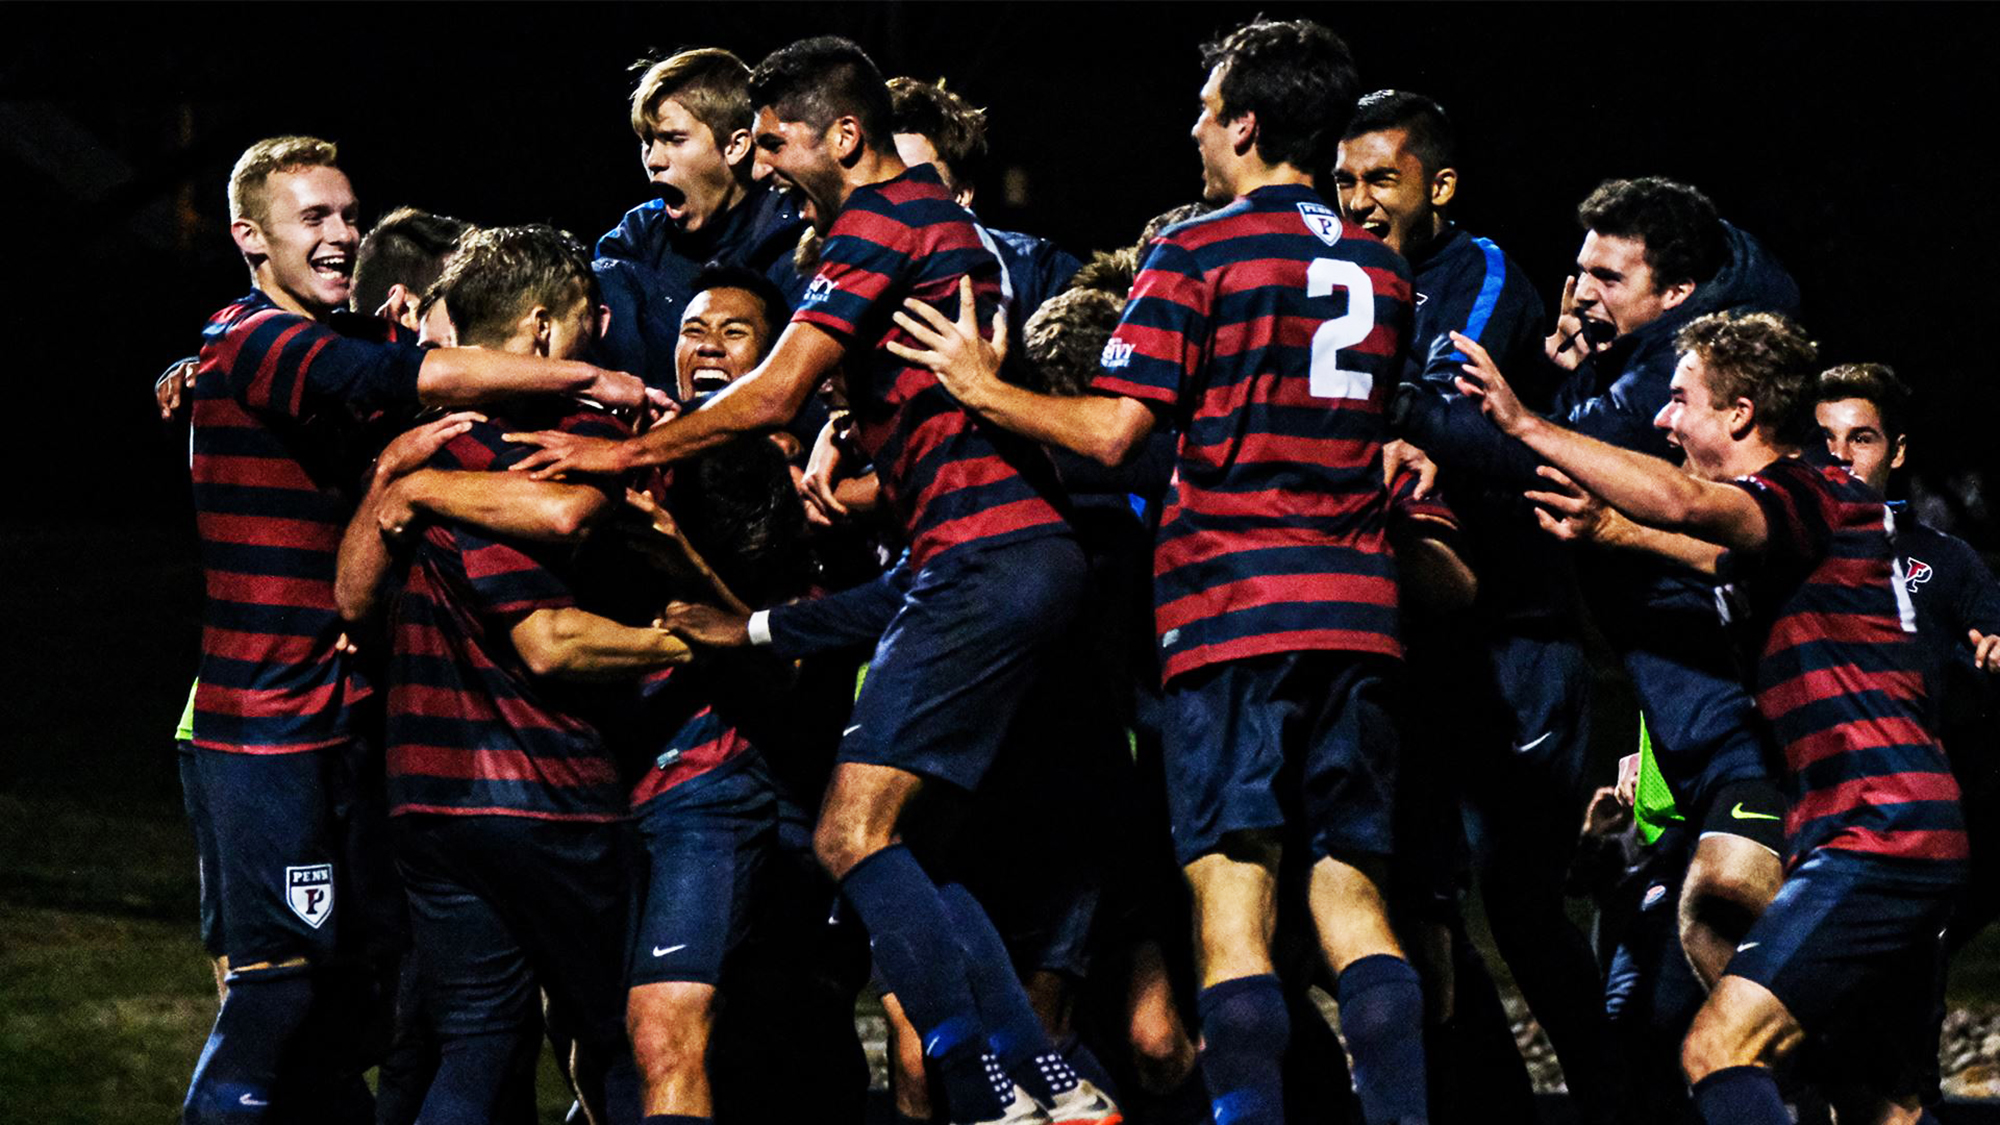 Members of the men's soccer team celebrate after the game-winning goal against Yale.